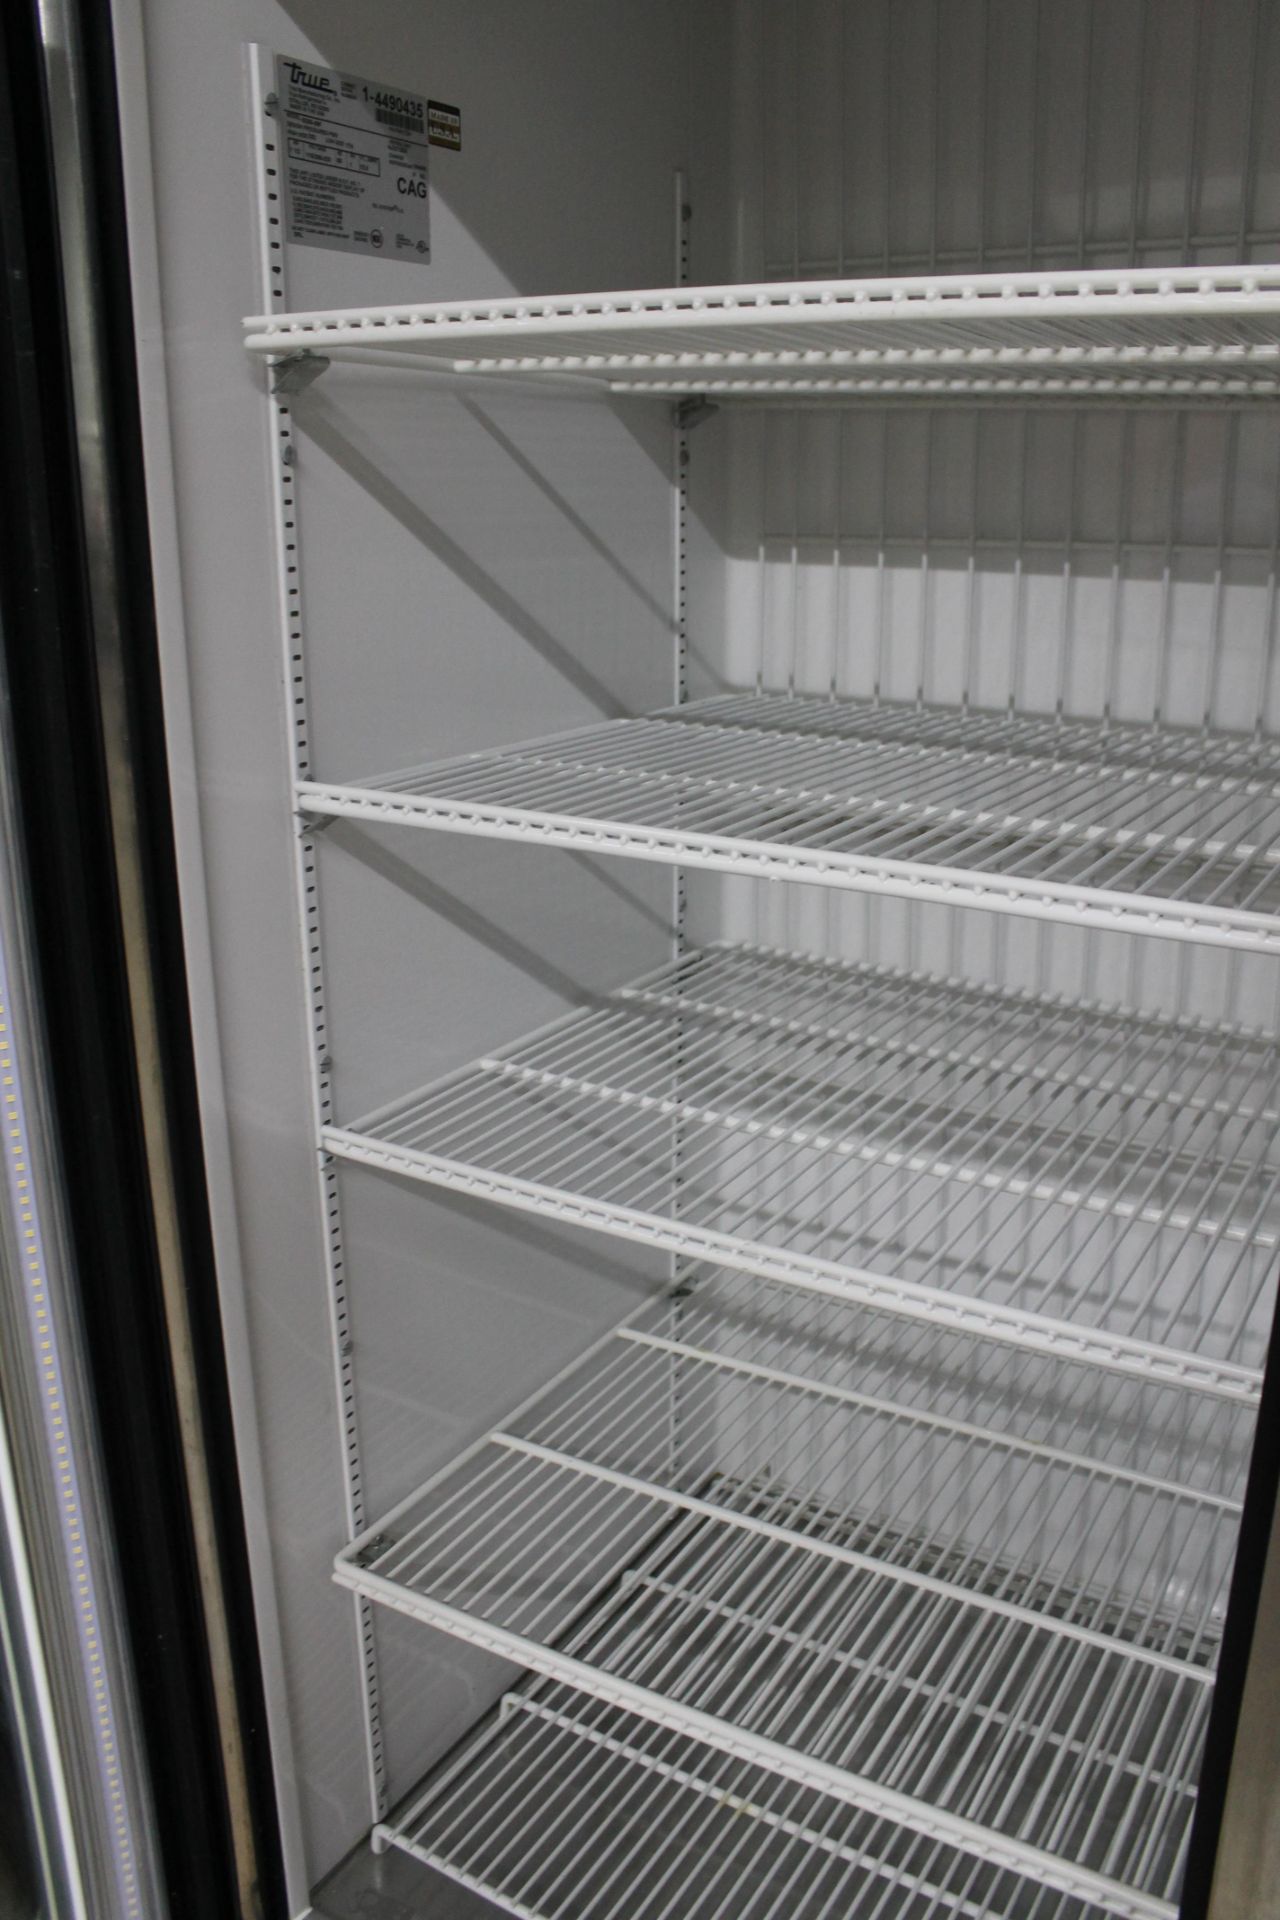 USED SWING DOOR REFRIGERATOR WITH HYDROCARBON REFRIGERANT - Image 5 of 5